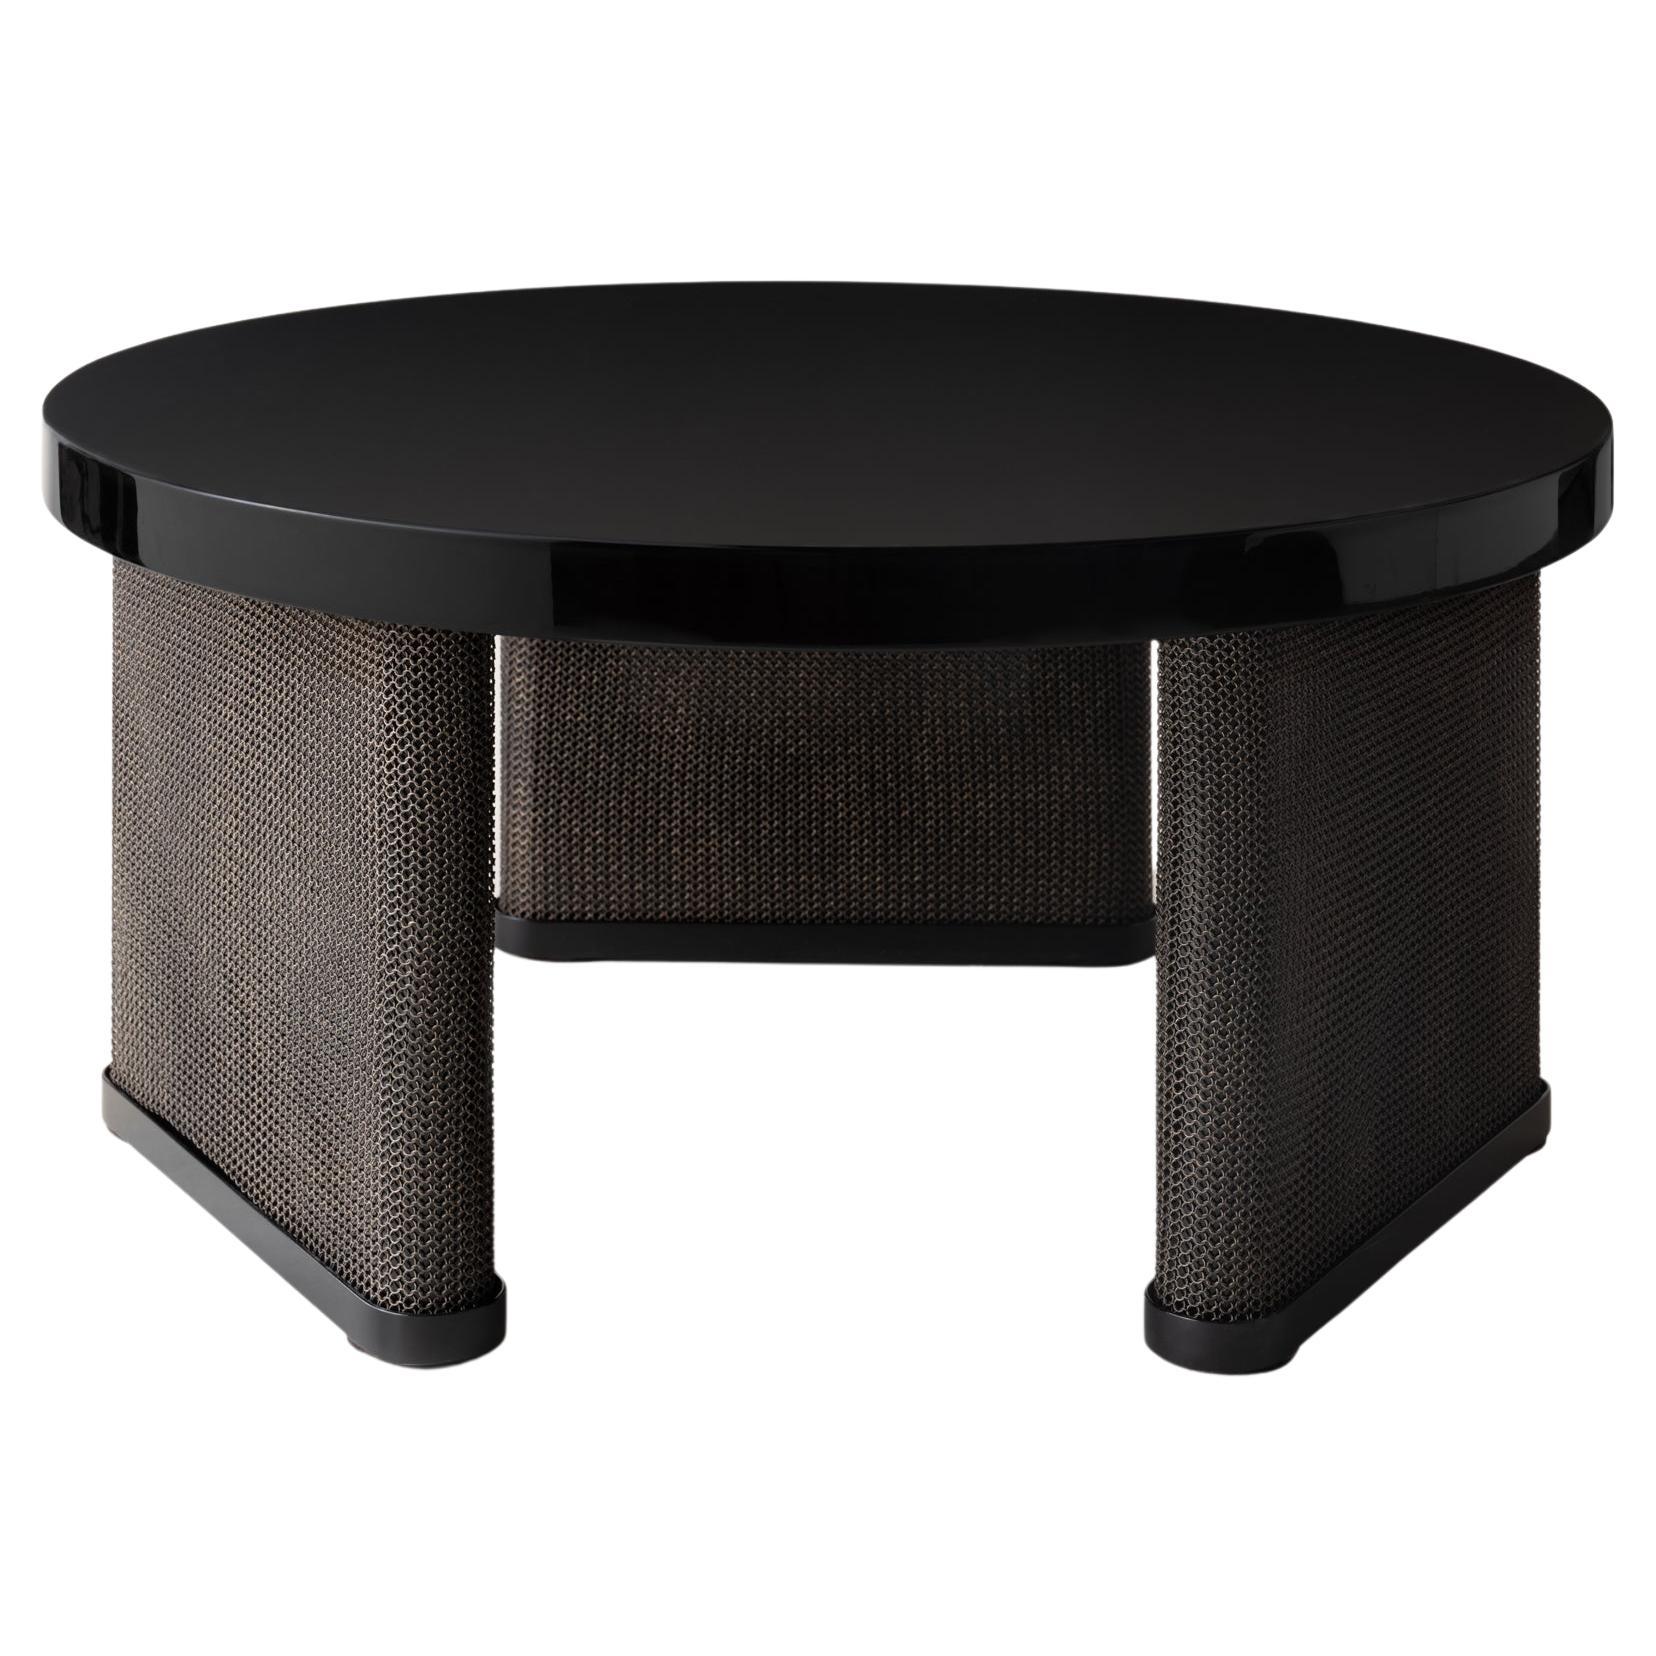 Konekt Armor Coffee Table Round with High Gloss Finish and Chainmail